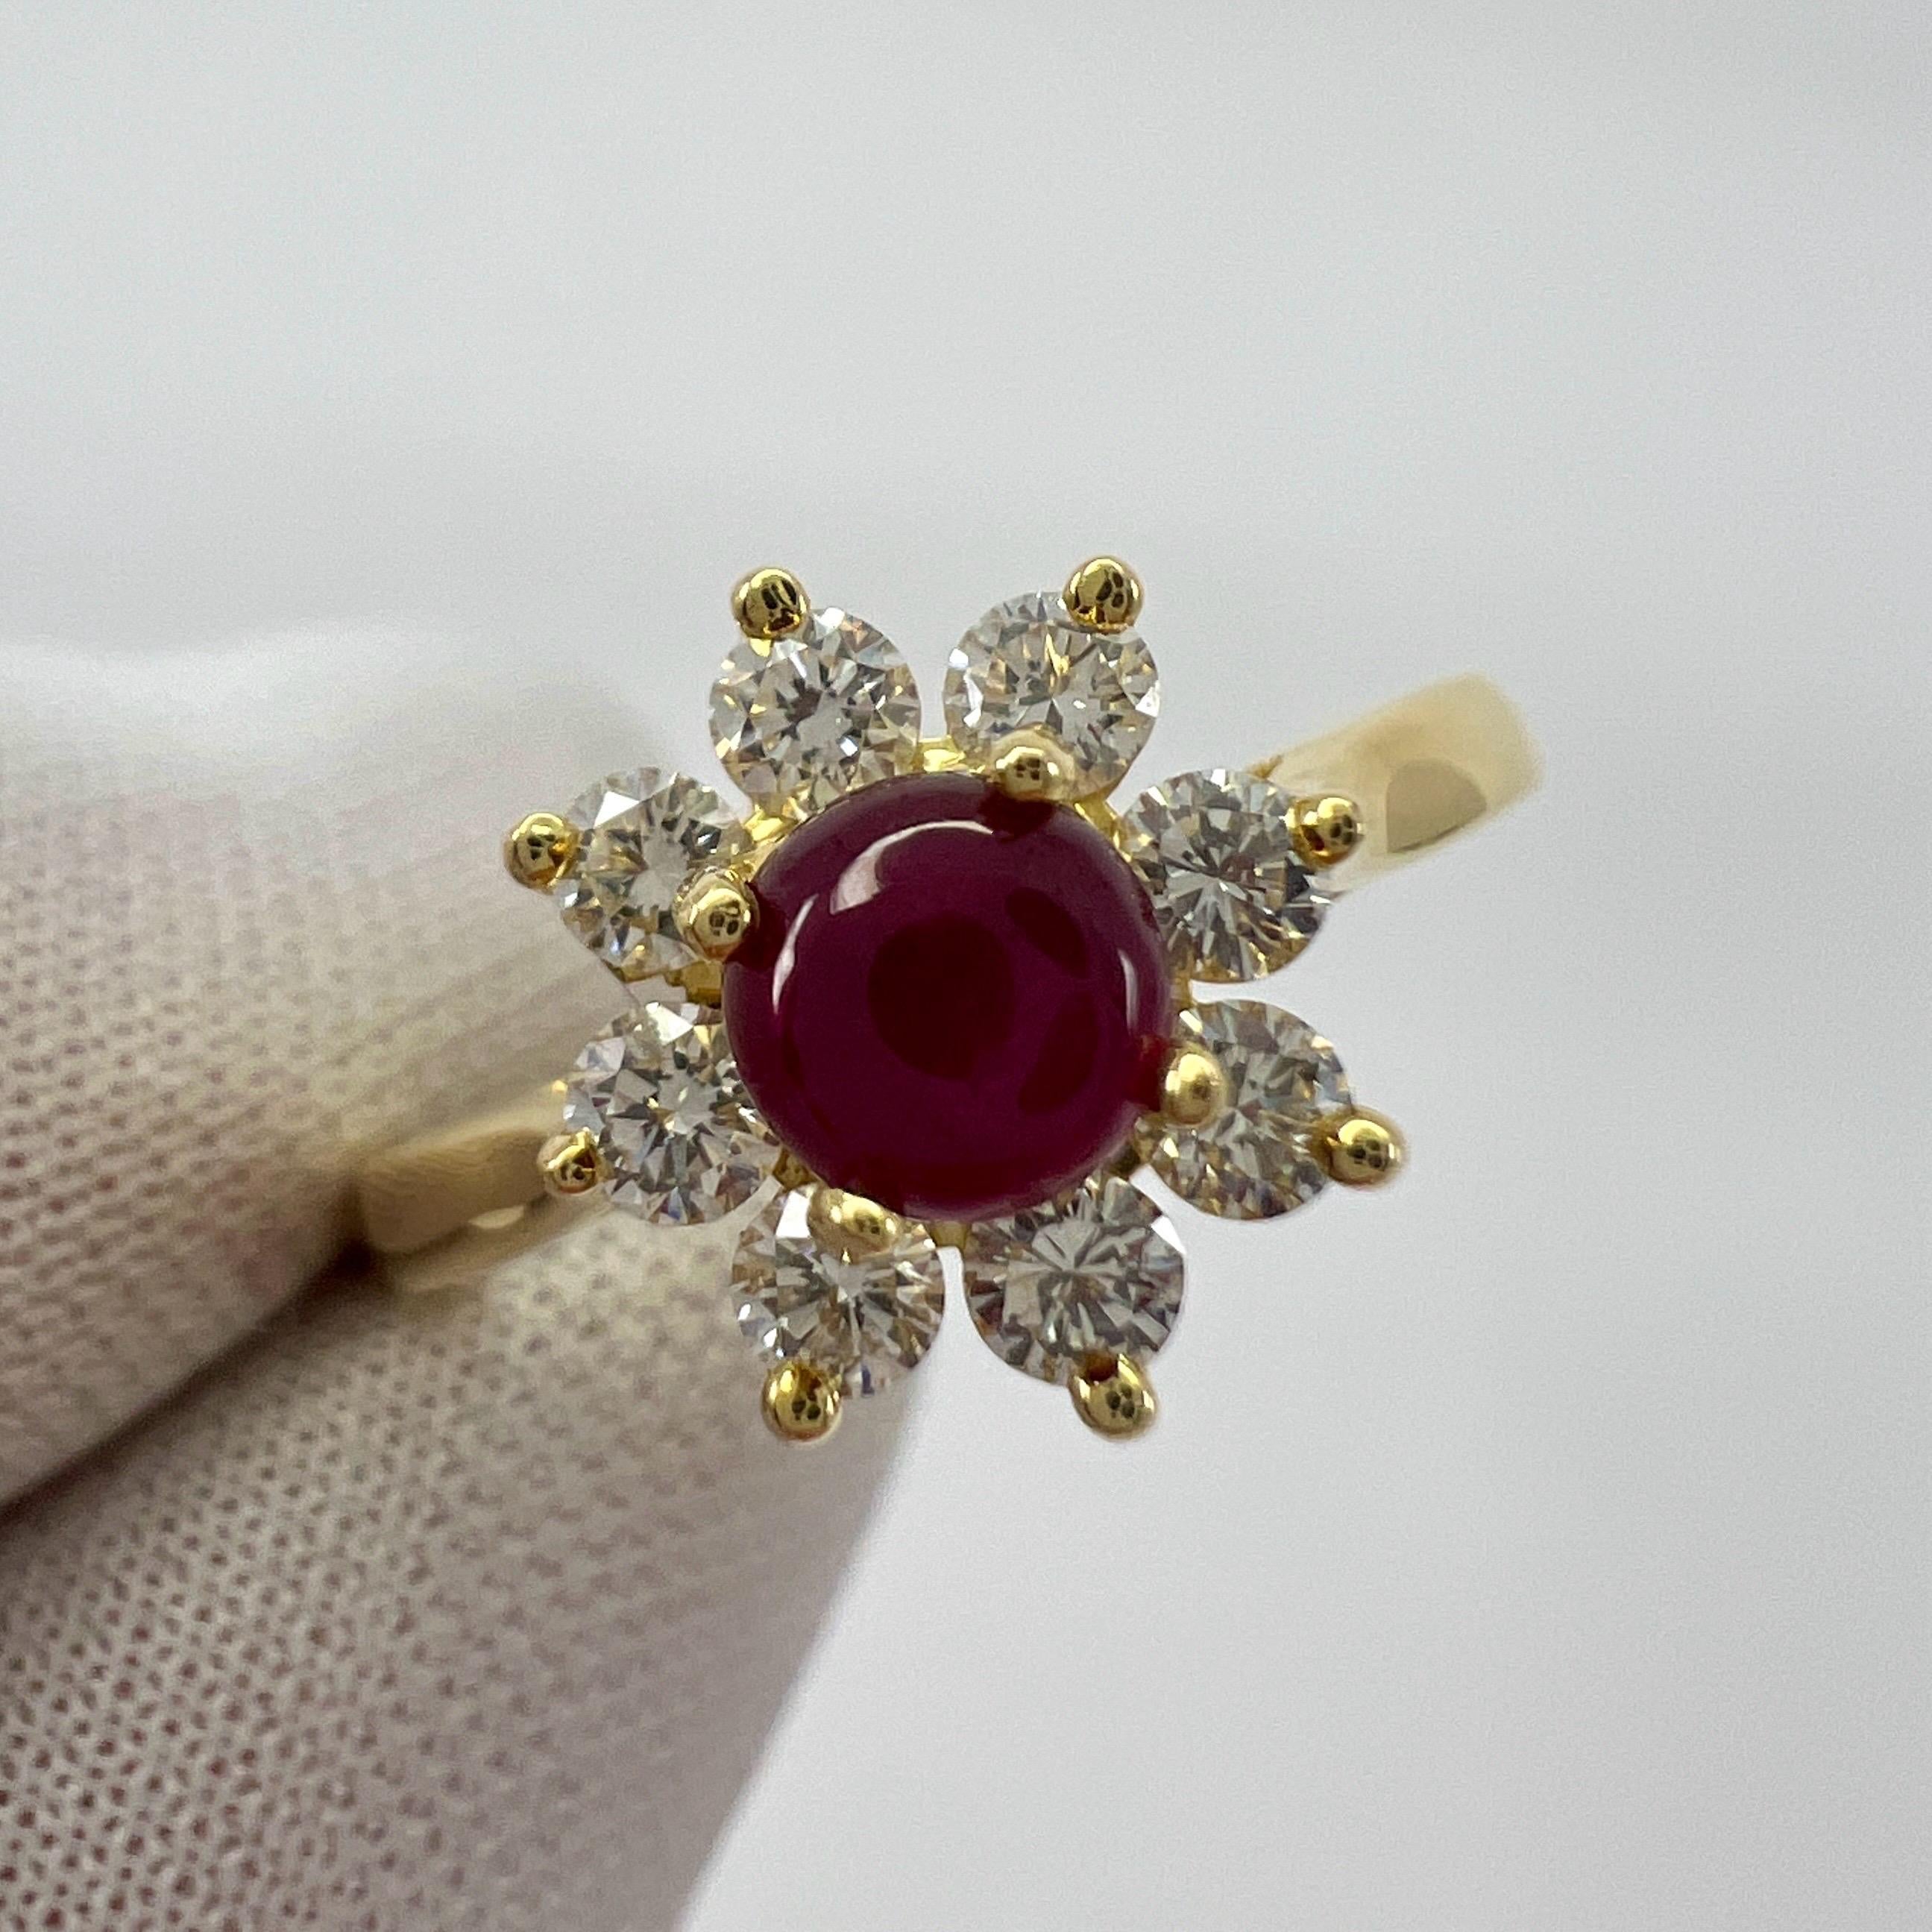 Vintage Tiffany & Co. Natural Round Cabochon Ruby And Diamond 18k Yellow Gold Flower 'Buttercup' Ring.

A beautifully made yellow gold cluster ring set with a stunning 4.4 mm round cabochon cut natural ruby centre stone. Superb colour with very good